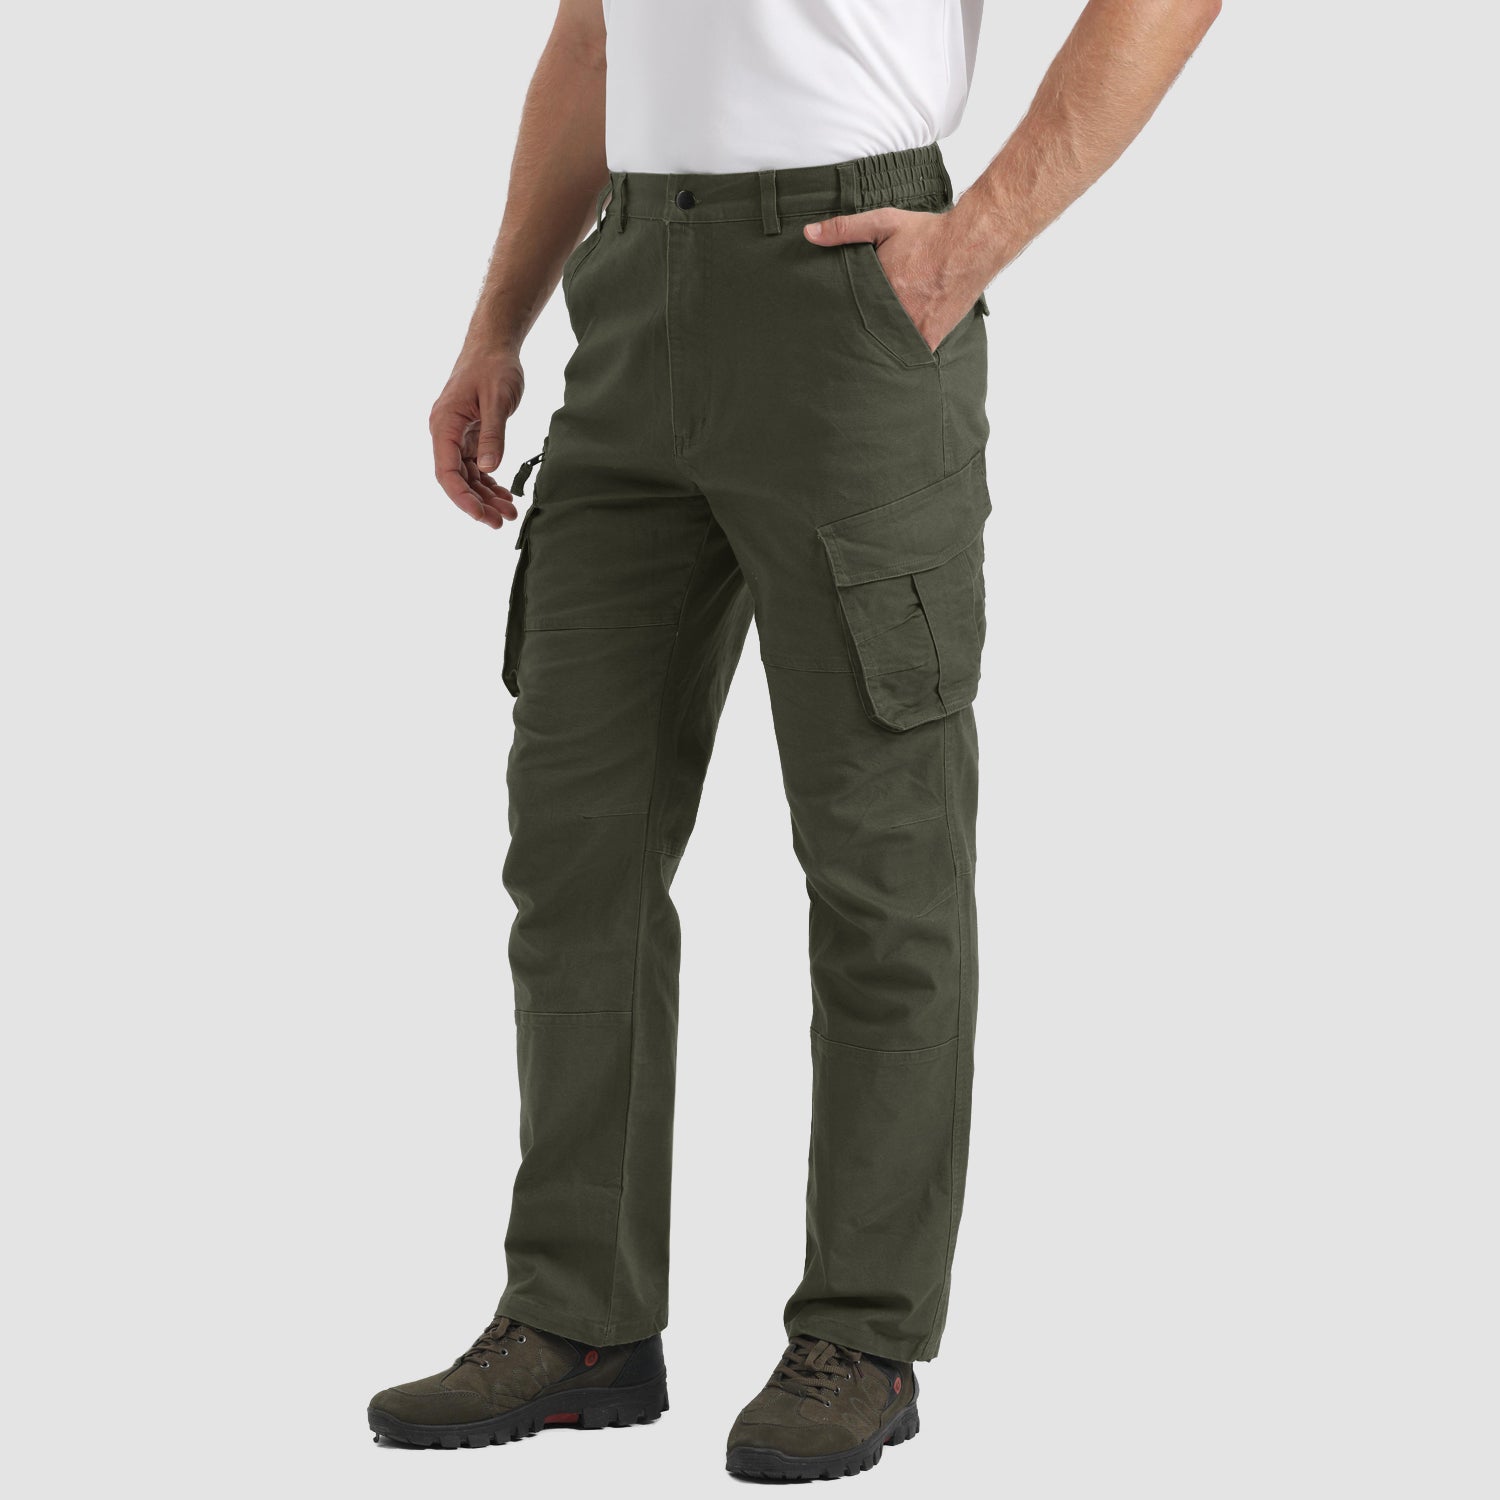 MAGCOMSEN Lightweight Hiking Pant Men Summer Cargo Pants Quick-Dry Nylon  Water-Resistant Outdoor Fishing Casual Trouser